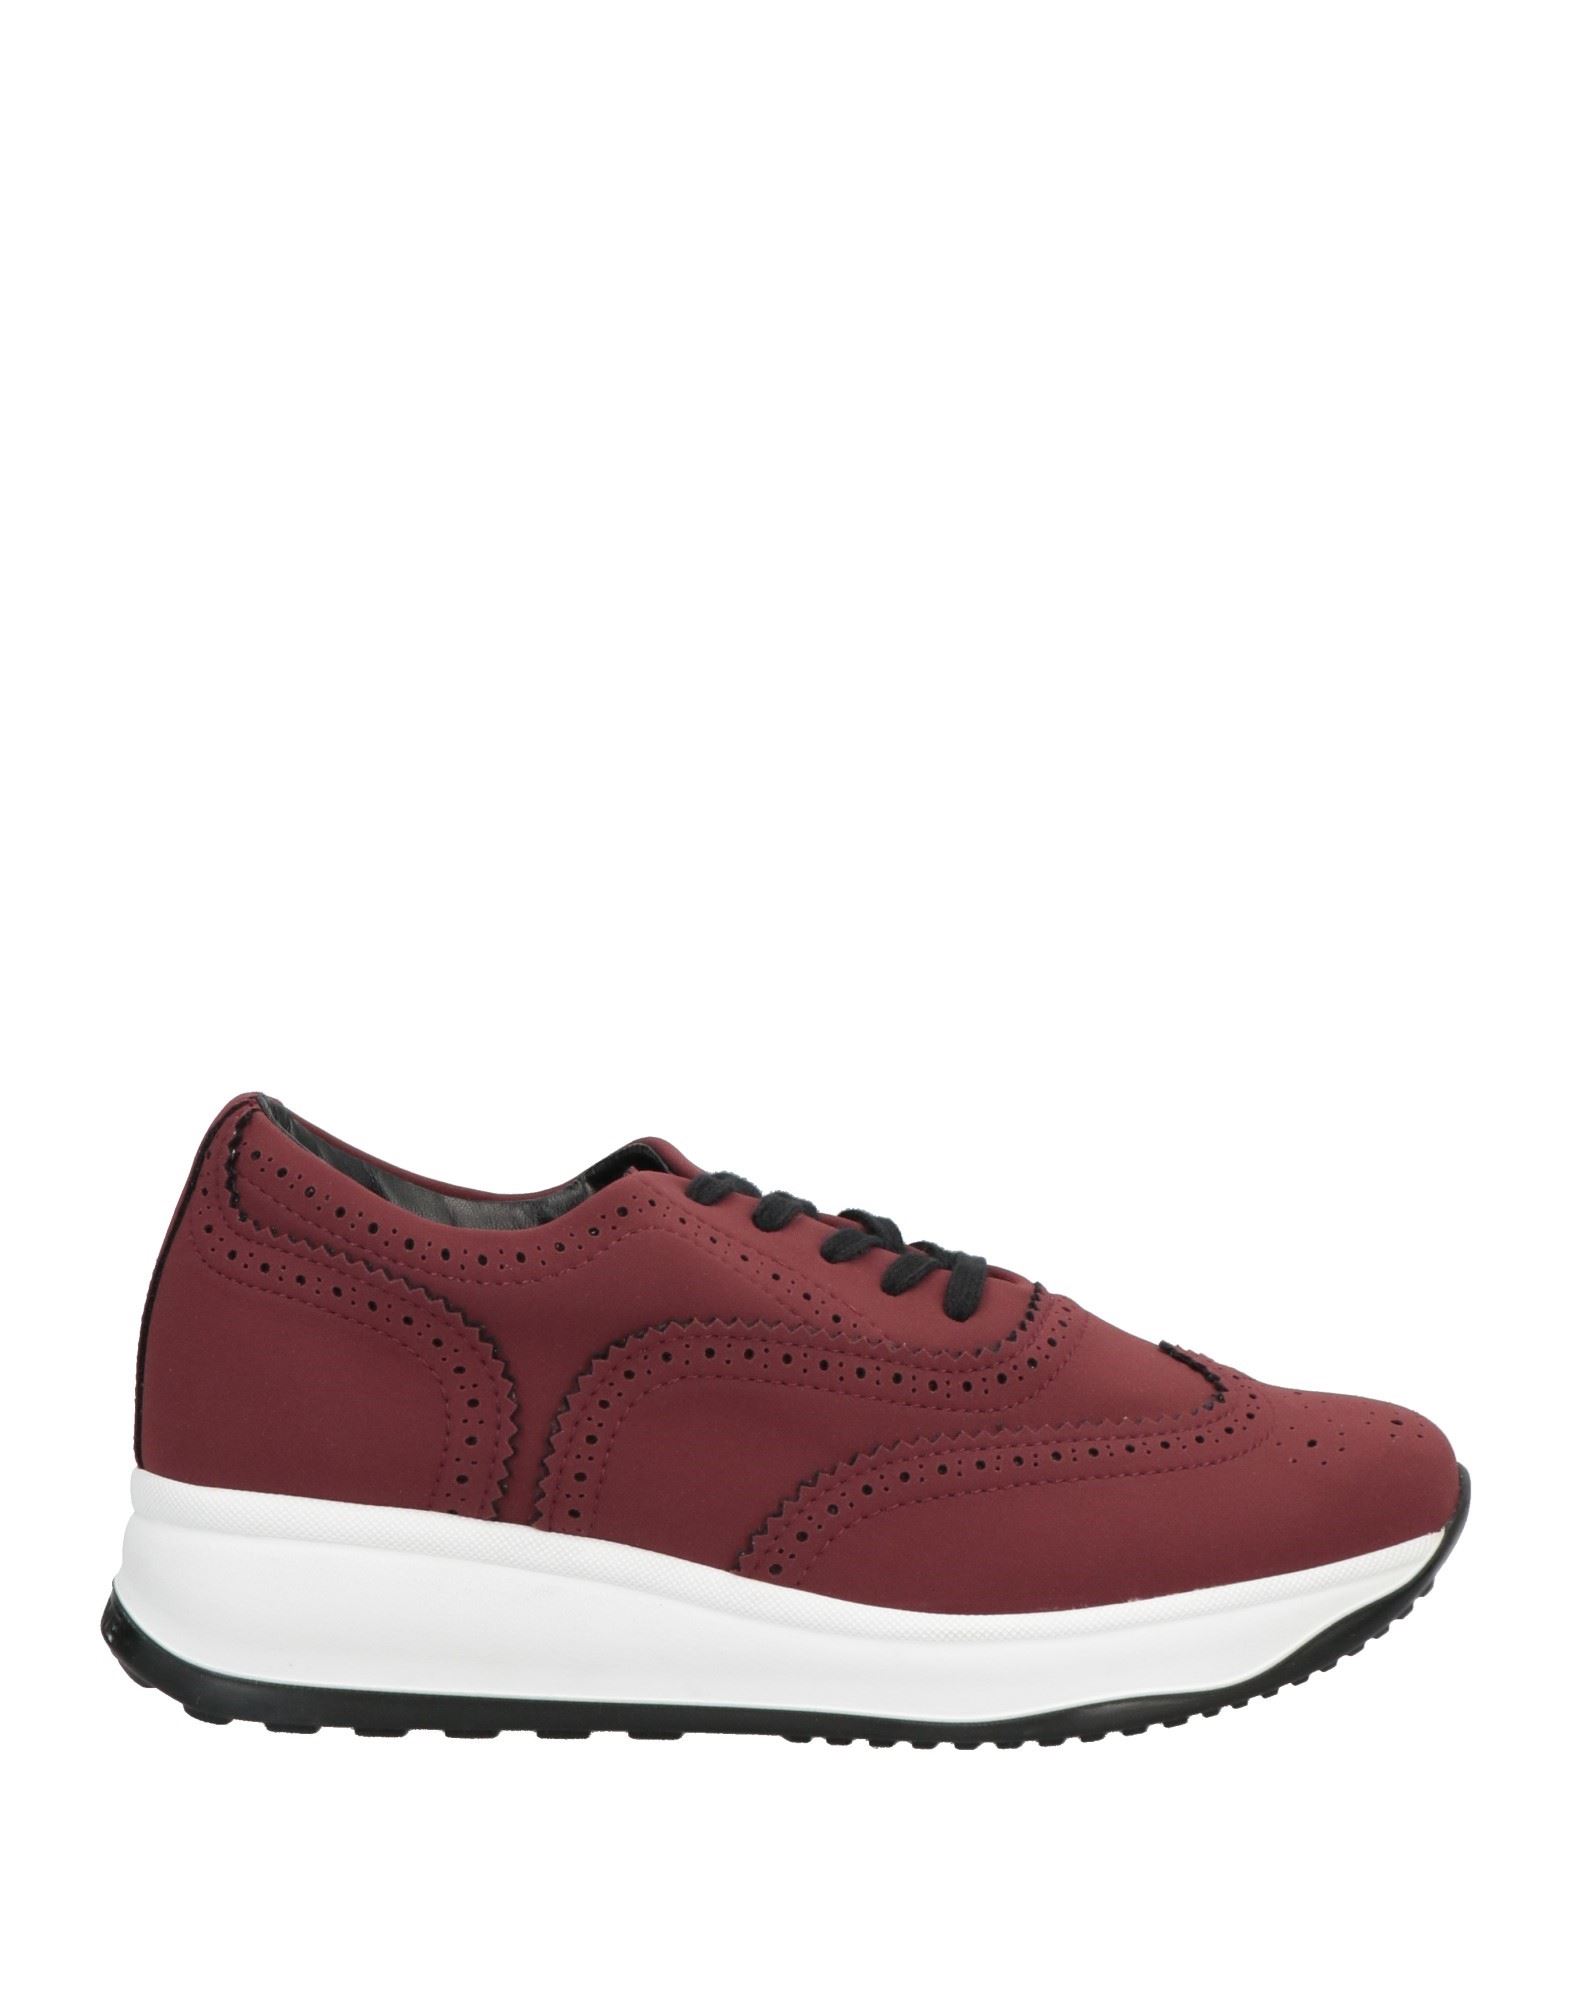 Agile By Rucoline Sneakers In Maroon